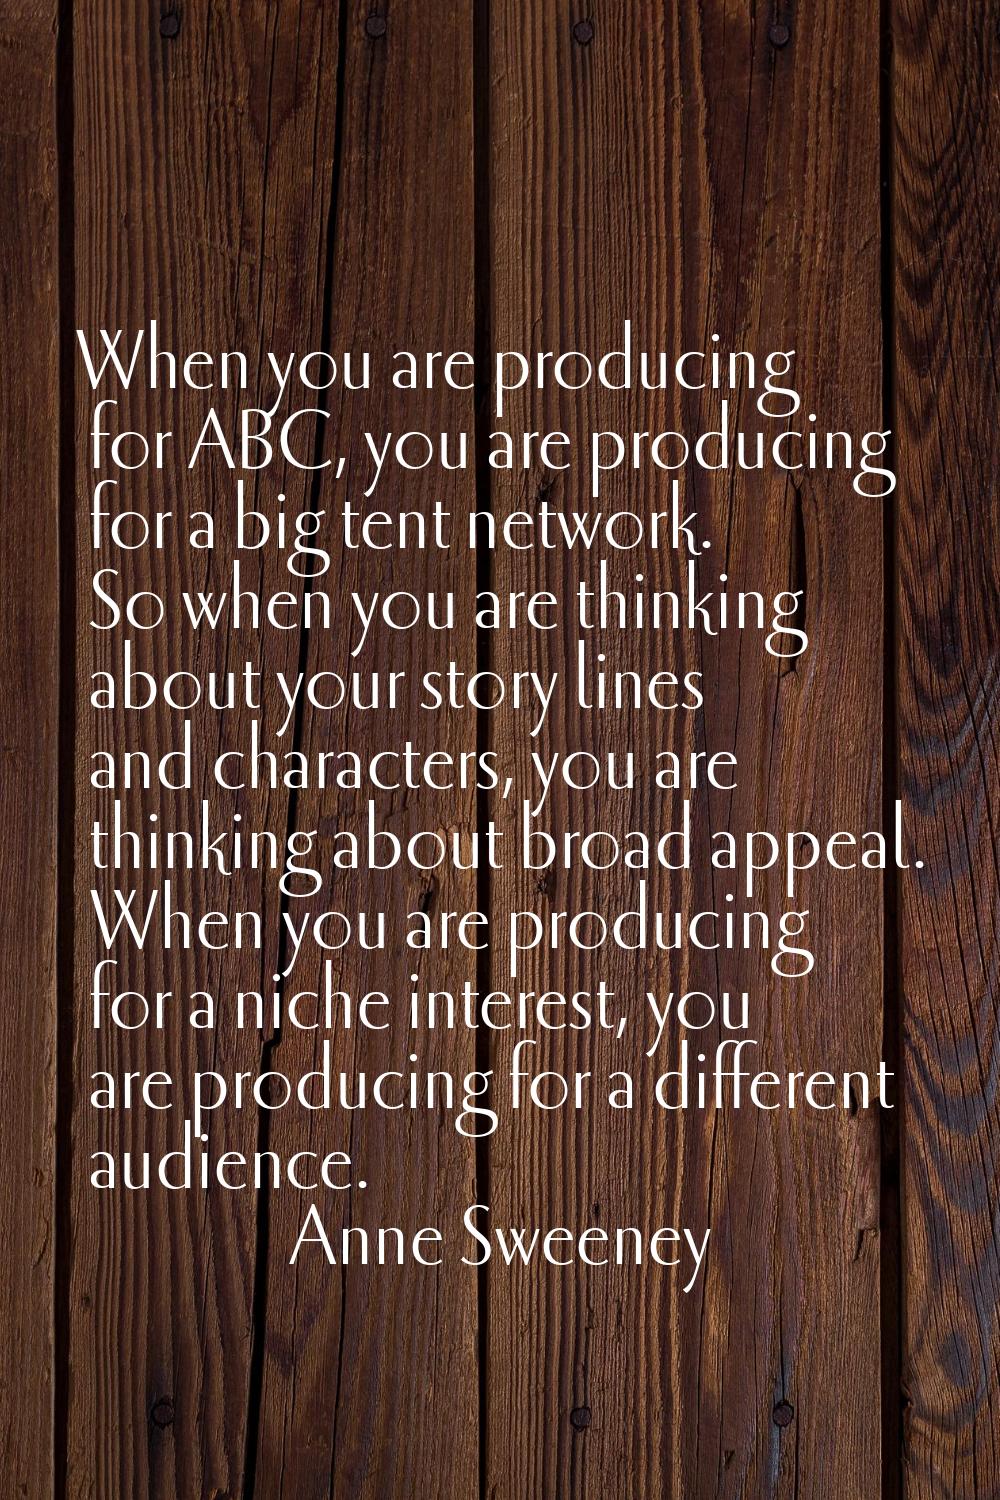 When you are producing for ABC, you are producing for a big tent network. So when you are thinking 